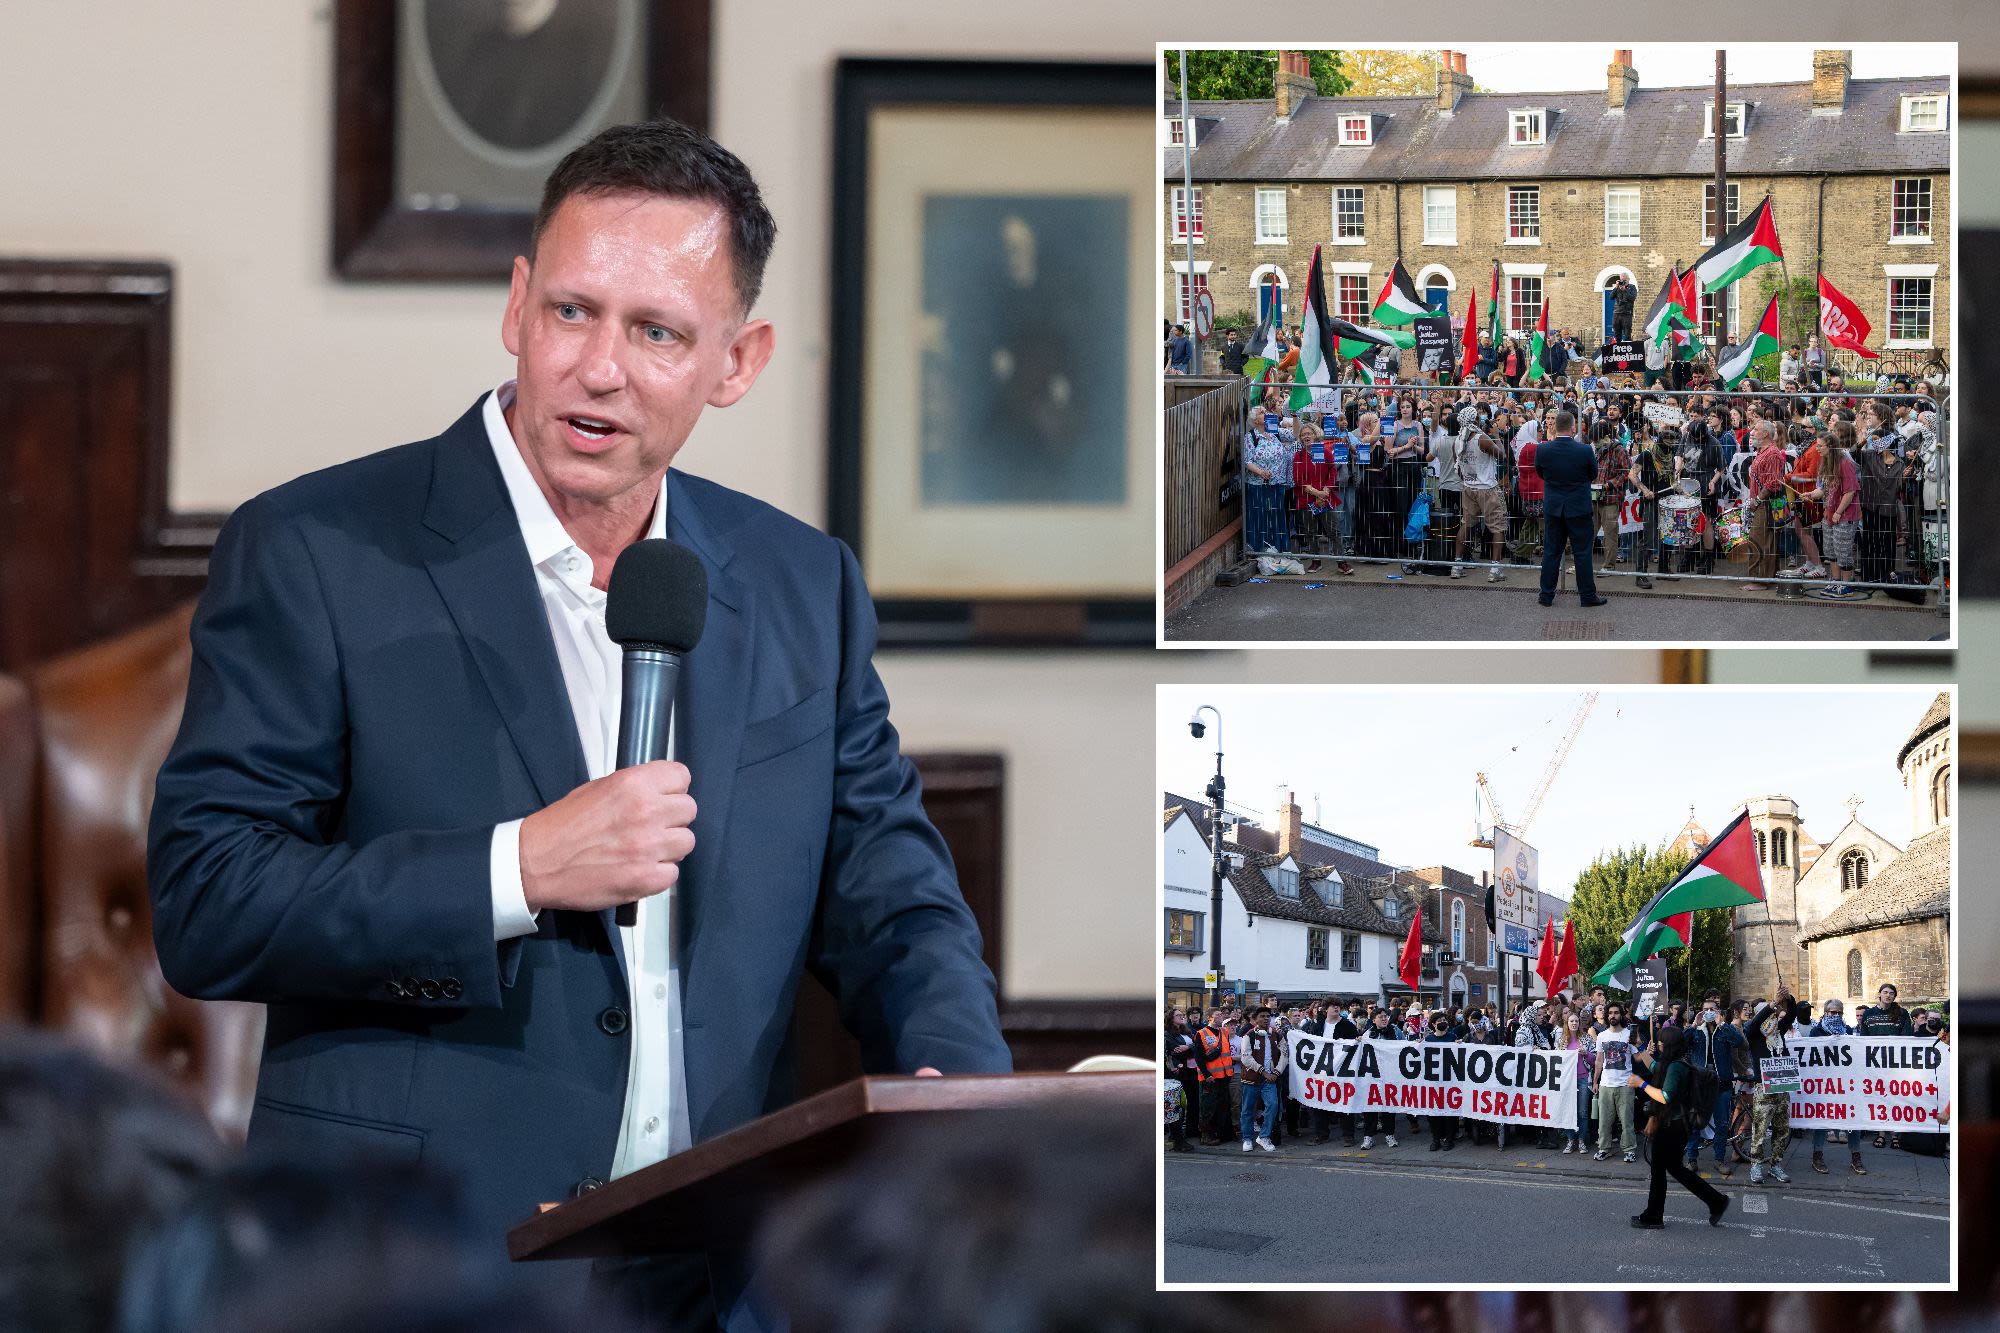 Peter Thiel was trapped inside Cambridge University debate hall by anti-Israel protesters